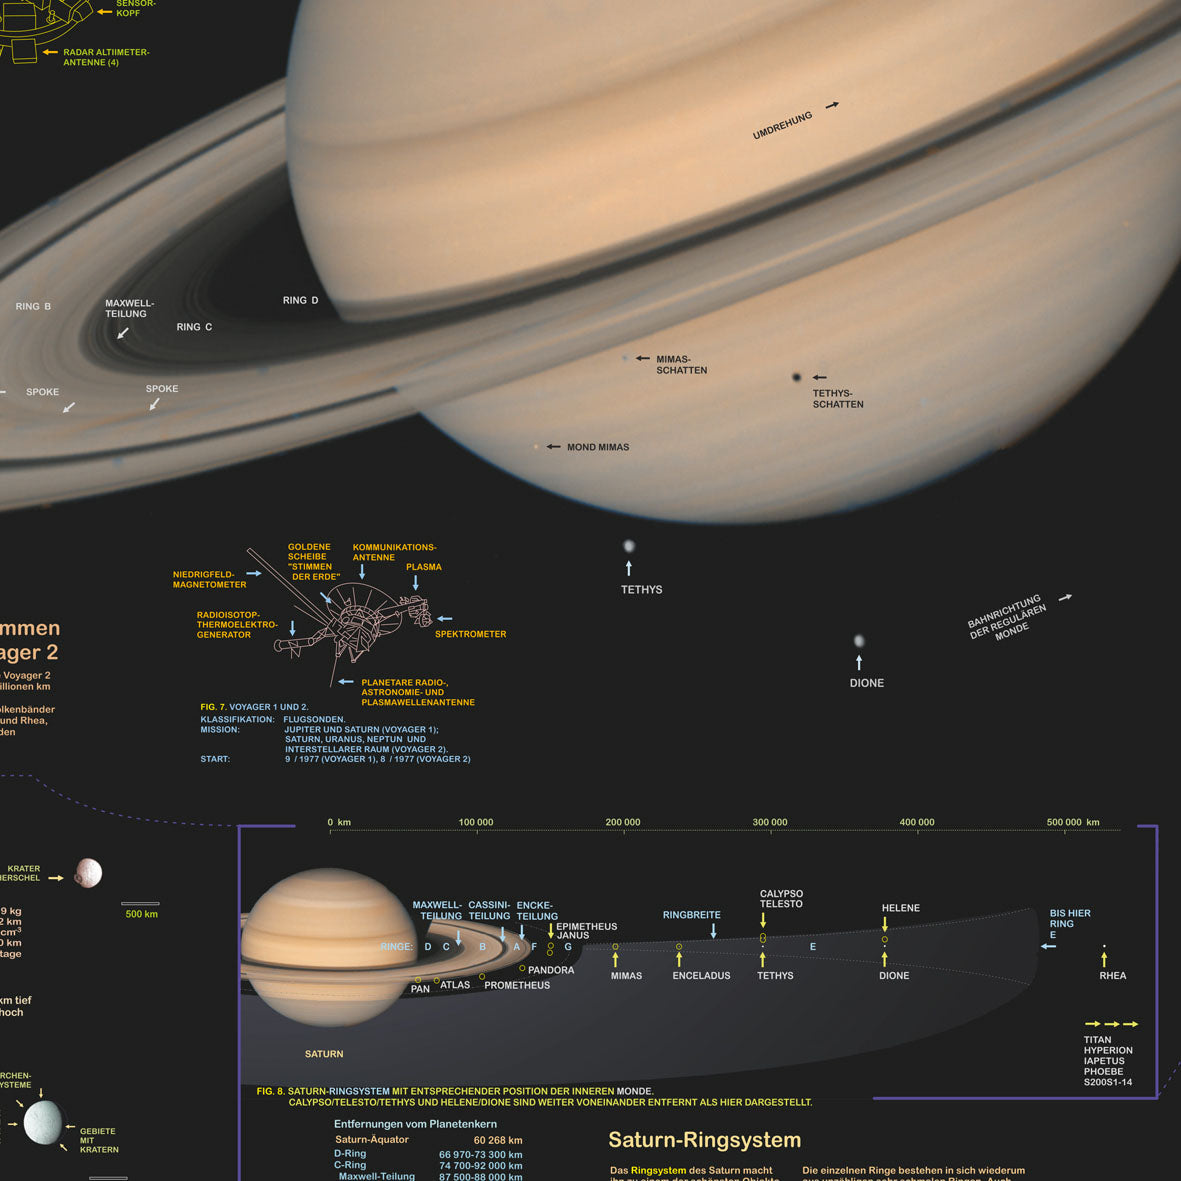 Poster "Planet Saturn"